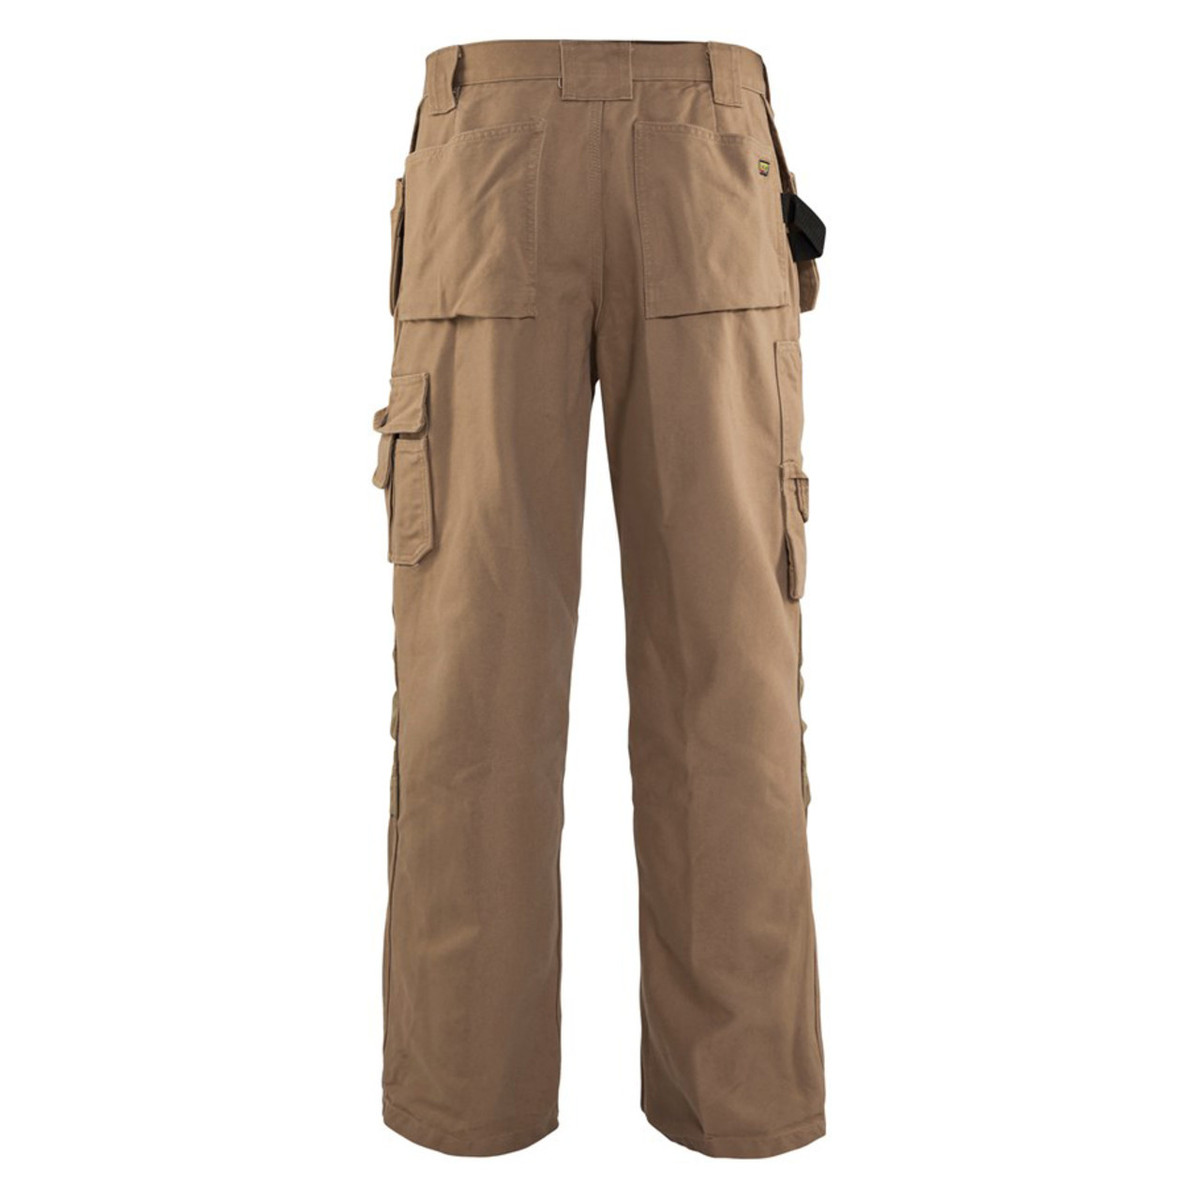 Blaklader Workpants Review